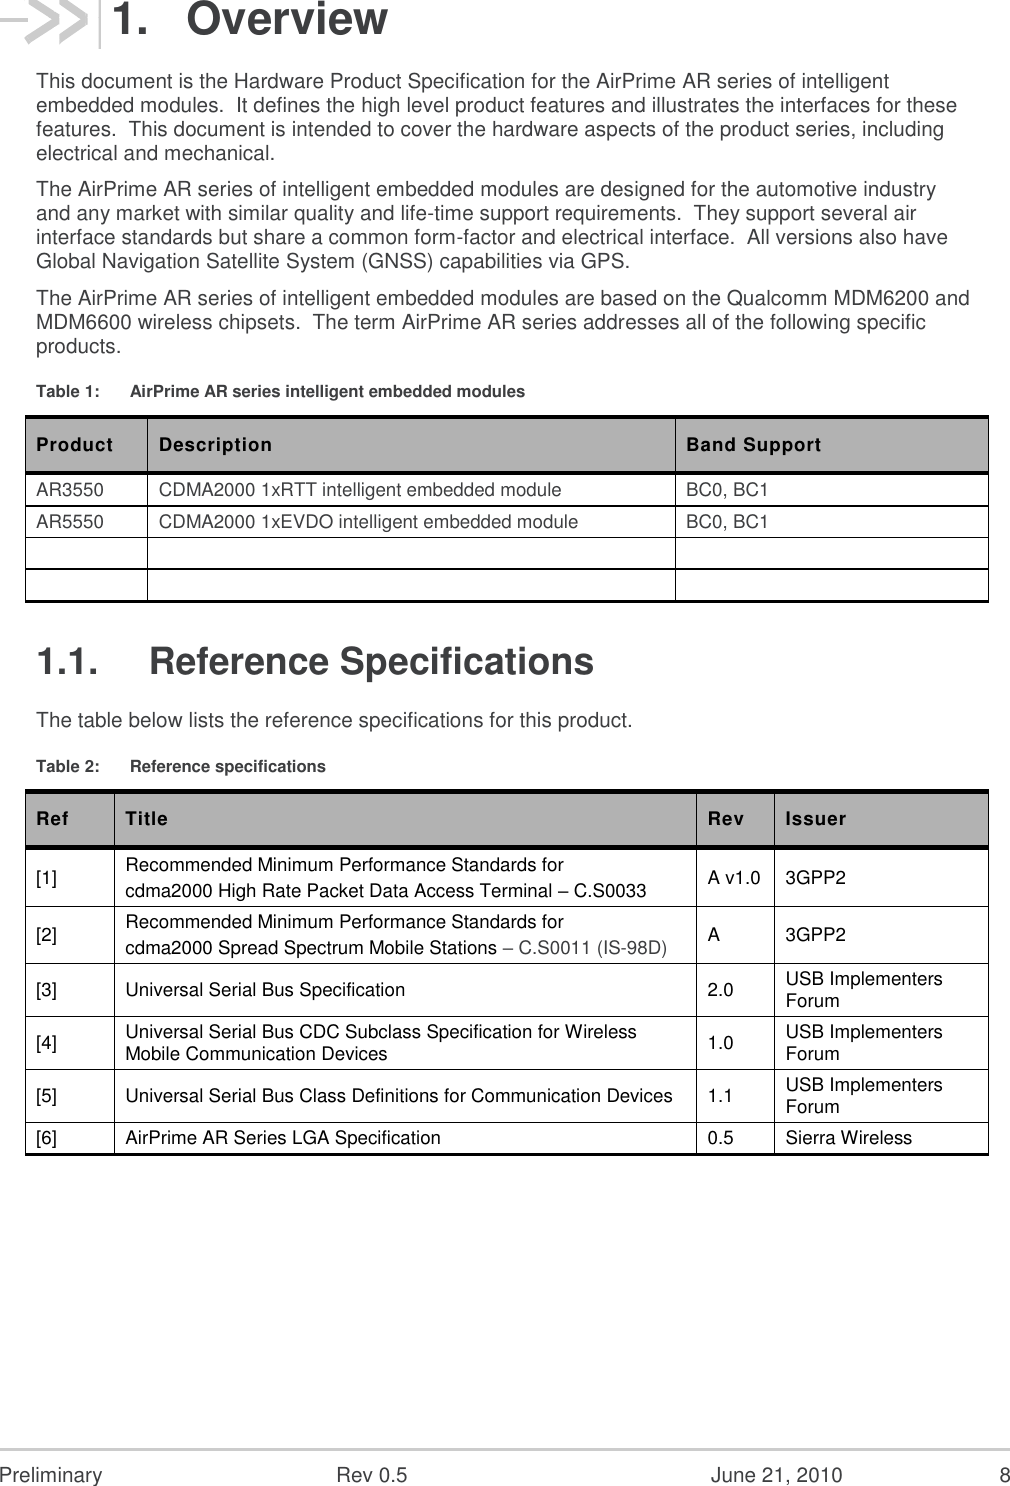  Preliminary  Rev 0.5  June 21, 2010  8 1.  Overview This document is the Hardware Product Specification for the AirPrime AR series of intelligent embedded modules.  It defines the high level product features and illustrates the interfaces for these features.  This document is intended to cover the hardware aspects of the product series, including electrical and mechanical. The AirPrime AR series of intelligent embedded modules are designed for the automotive industry and any market with similar quality and life-time support requirements.  They support several air interface standards but share a common form-factor and electrical interface.  All versions also have Global Navigation Satellite System (GNSS) capabilities via GPS. The AirPrime AR series of intelligent embedded modules are based on the Qualcomm MDM6200 and MDM6600 wireless chipsets.  The term AirPrime AR series addresses all of the following specific products. Table 1:  AirPrime AR series intelligent embedded modules Product Description Band Support AR3550 CDMA2000 1xRTT intelligent embedded module BC0, BC1 AR5550 CDMA2000 1xEVDO intelligent embedded module BC0, BC1       1.1.  Reference Specifications The table below lists the reference specifications for this product. Table 2:  Reference specifications Ref Title Rev Issuer [1] Recommended Minimum Performance Standards for cdma2000 High Rate Packet Data Access Terminal – C.S0033 A v1.0 3GPP2 [2] Recommended Minimum Performance Standards for cdma2000 Spread Spectrum Mobile Stations – C.S0011 (IS-98D) A 3GPP2 [3] Universal Serial Bus Specification 2.0 USB Implementers Forum [4] Universal Serial Bus CDC Subclass Specification for Wireless Mobile Communication Devices 1.0 USB Implementers Forum [5] Universal Serial Bus Class Definitions for Communication Devices 1.1 USB Implementers Forum [6] AirPrime AR Series LGA Specification 0.5 Sierra Wireless  